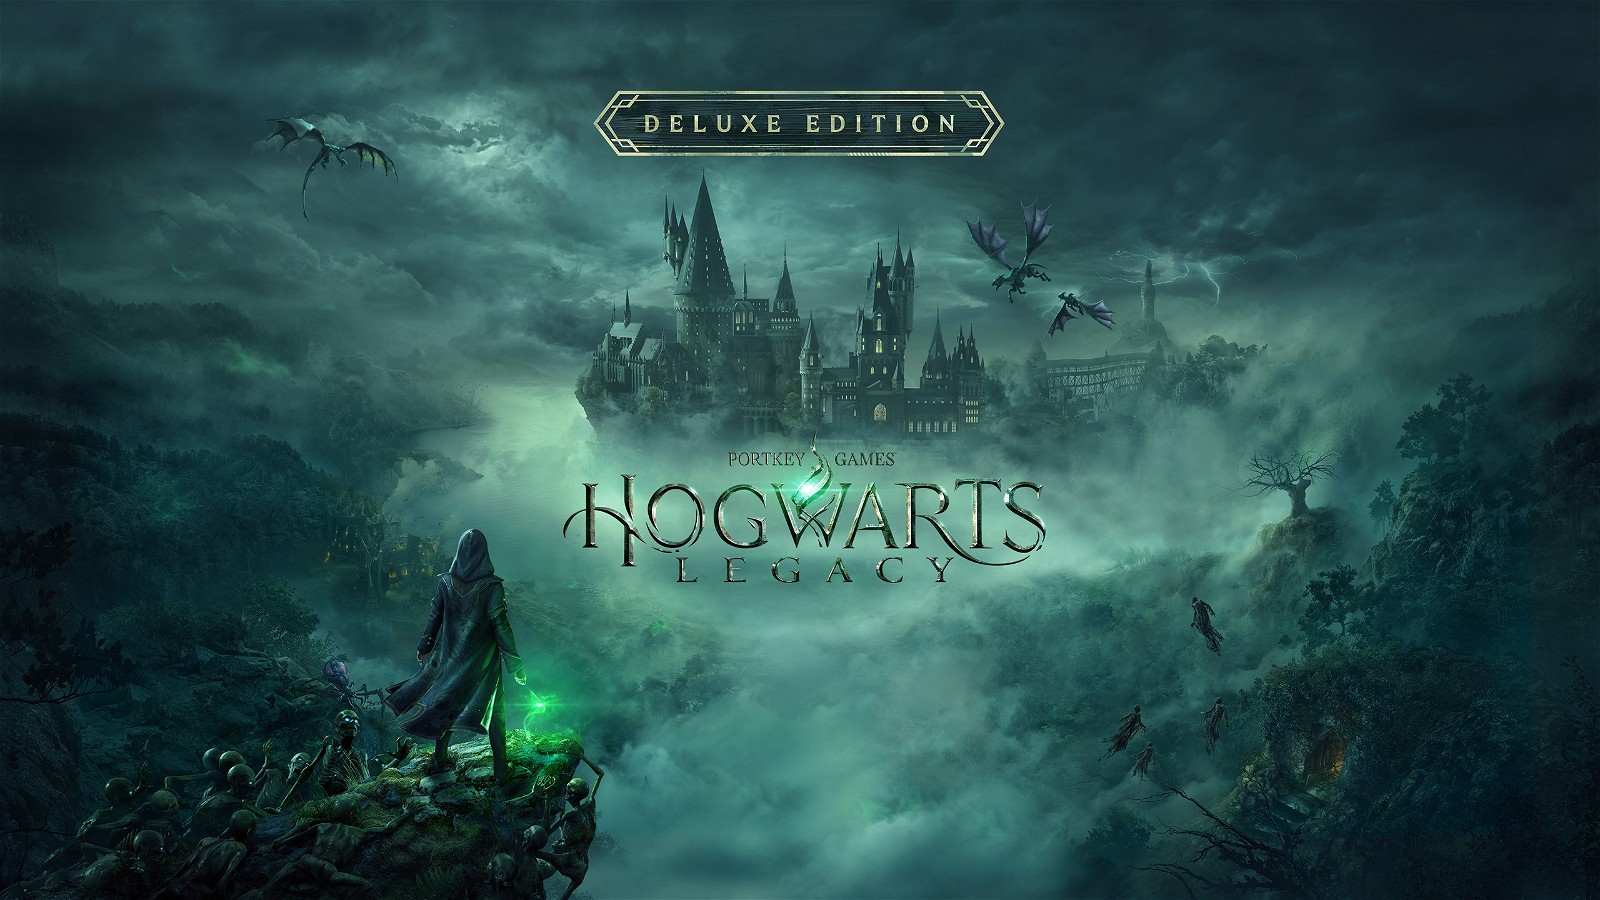 Is Hogwarts Legacy 2 in the works by developer Avalanche Software?